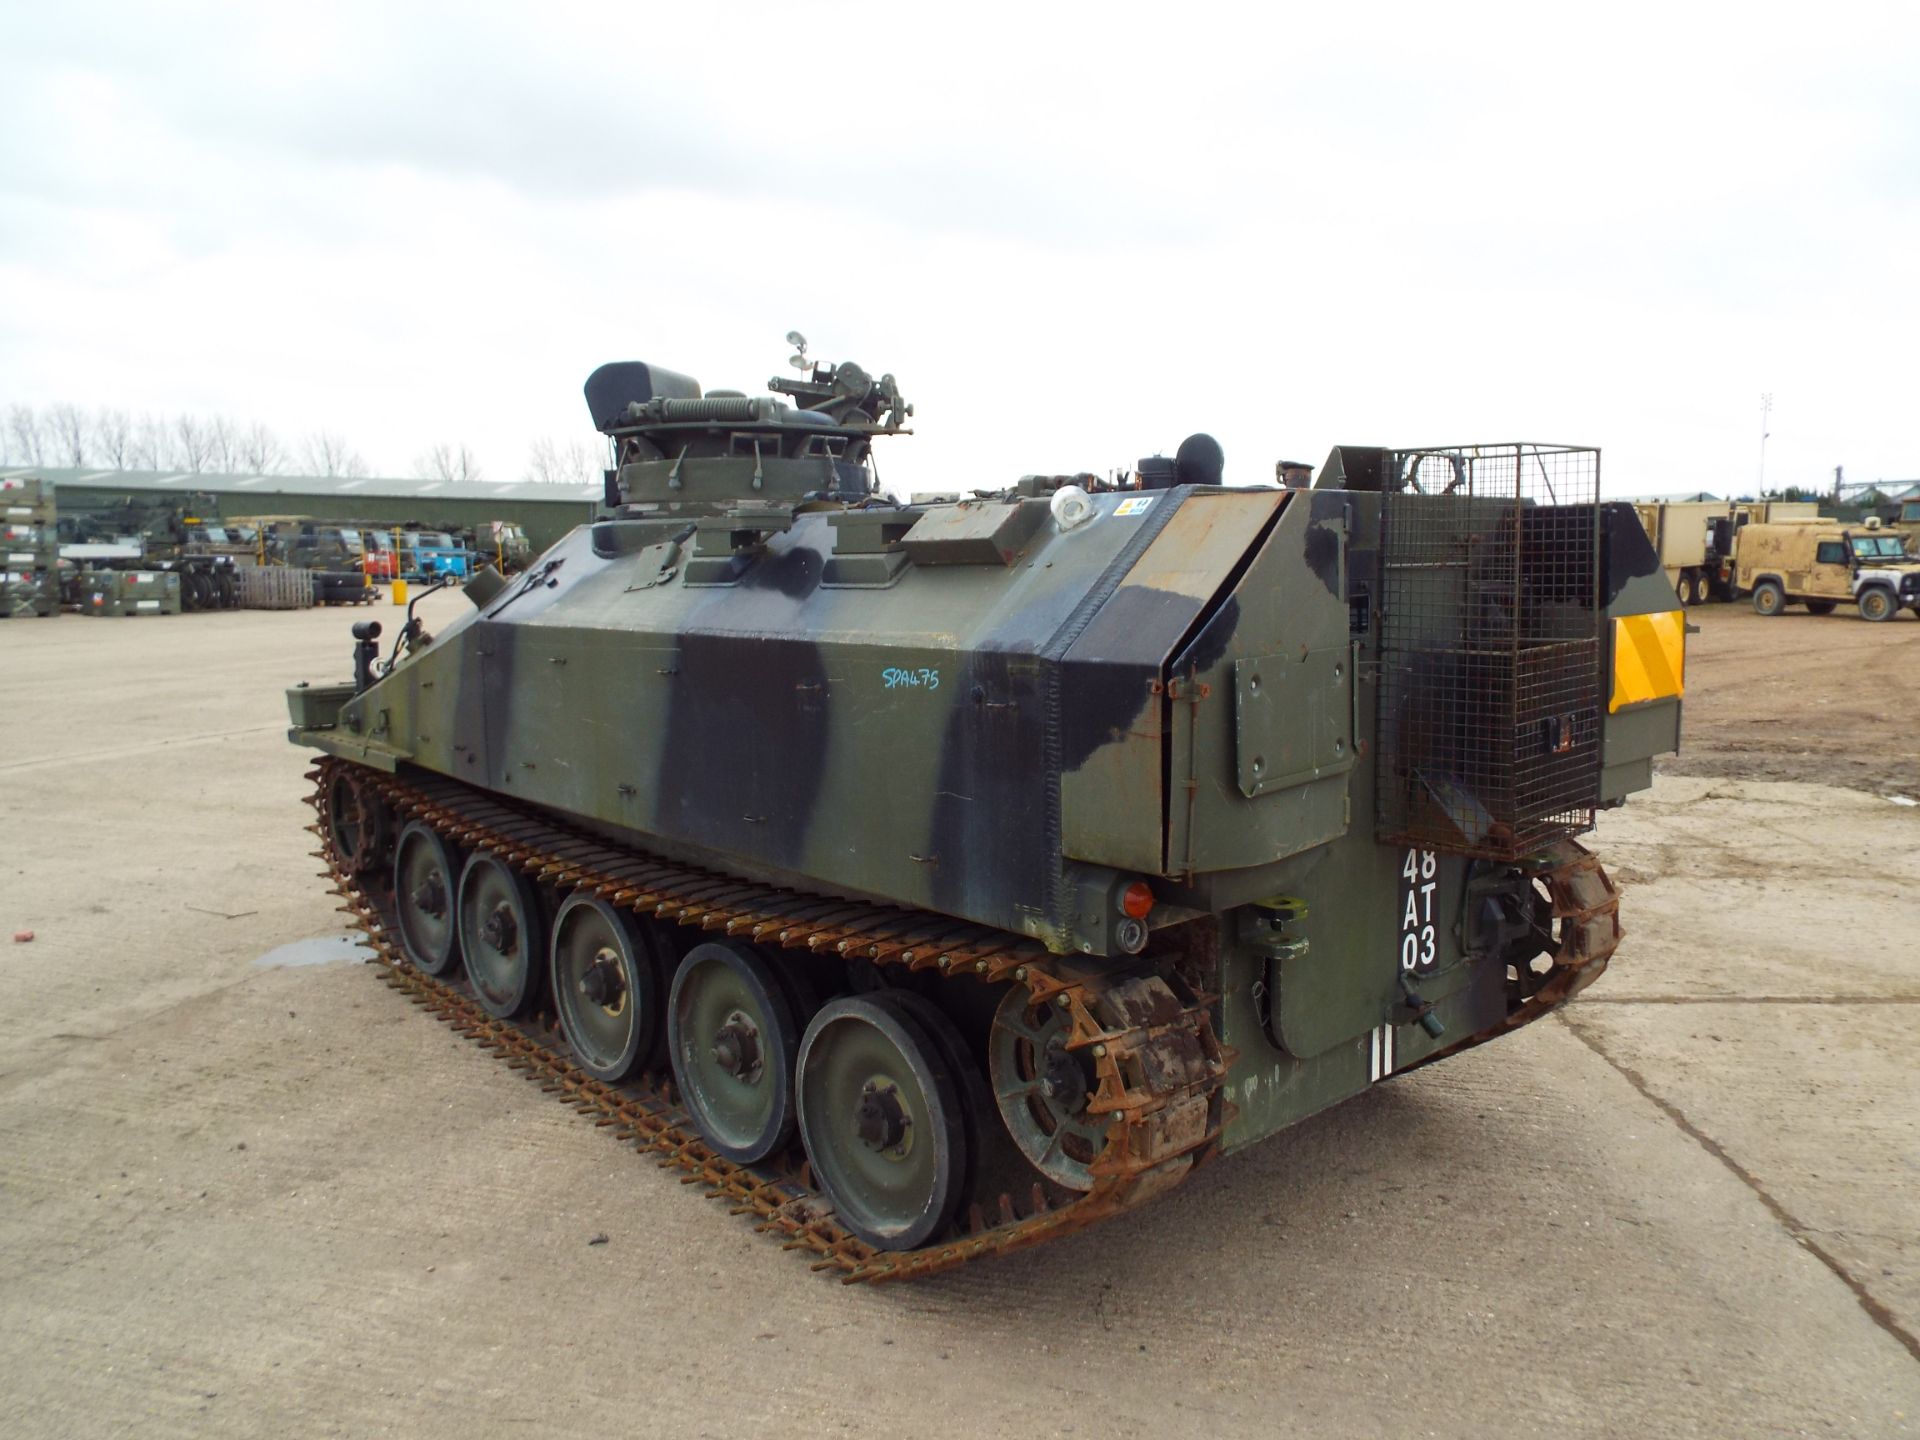 Dieselised CVRT (Combat Vehicle Reconnaissance Tracked) Spartan Armoured Personnel Carrier - Image 5 of 28